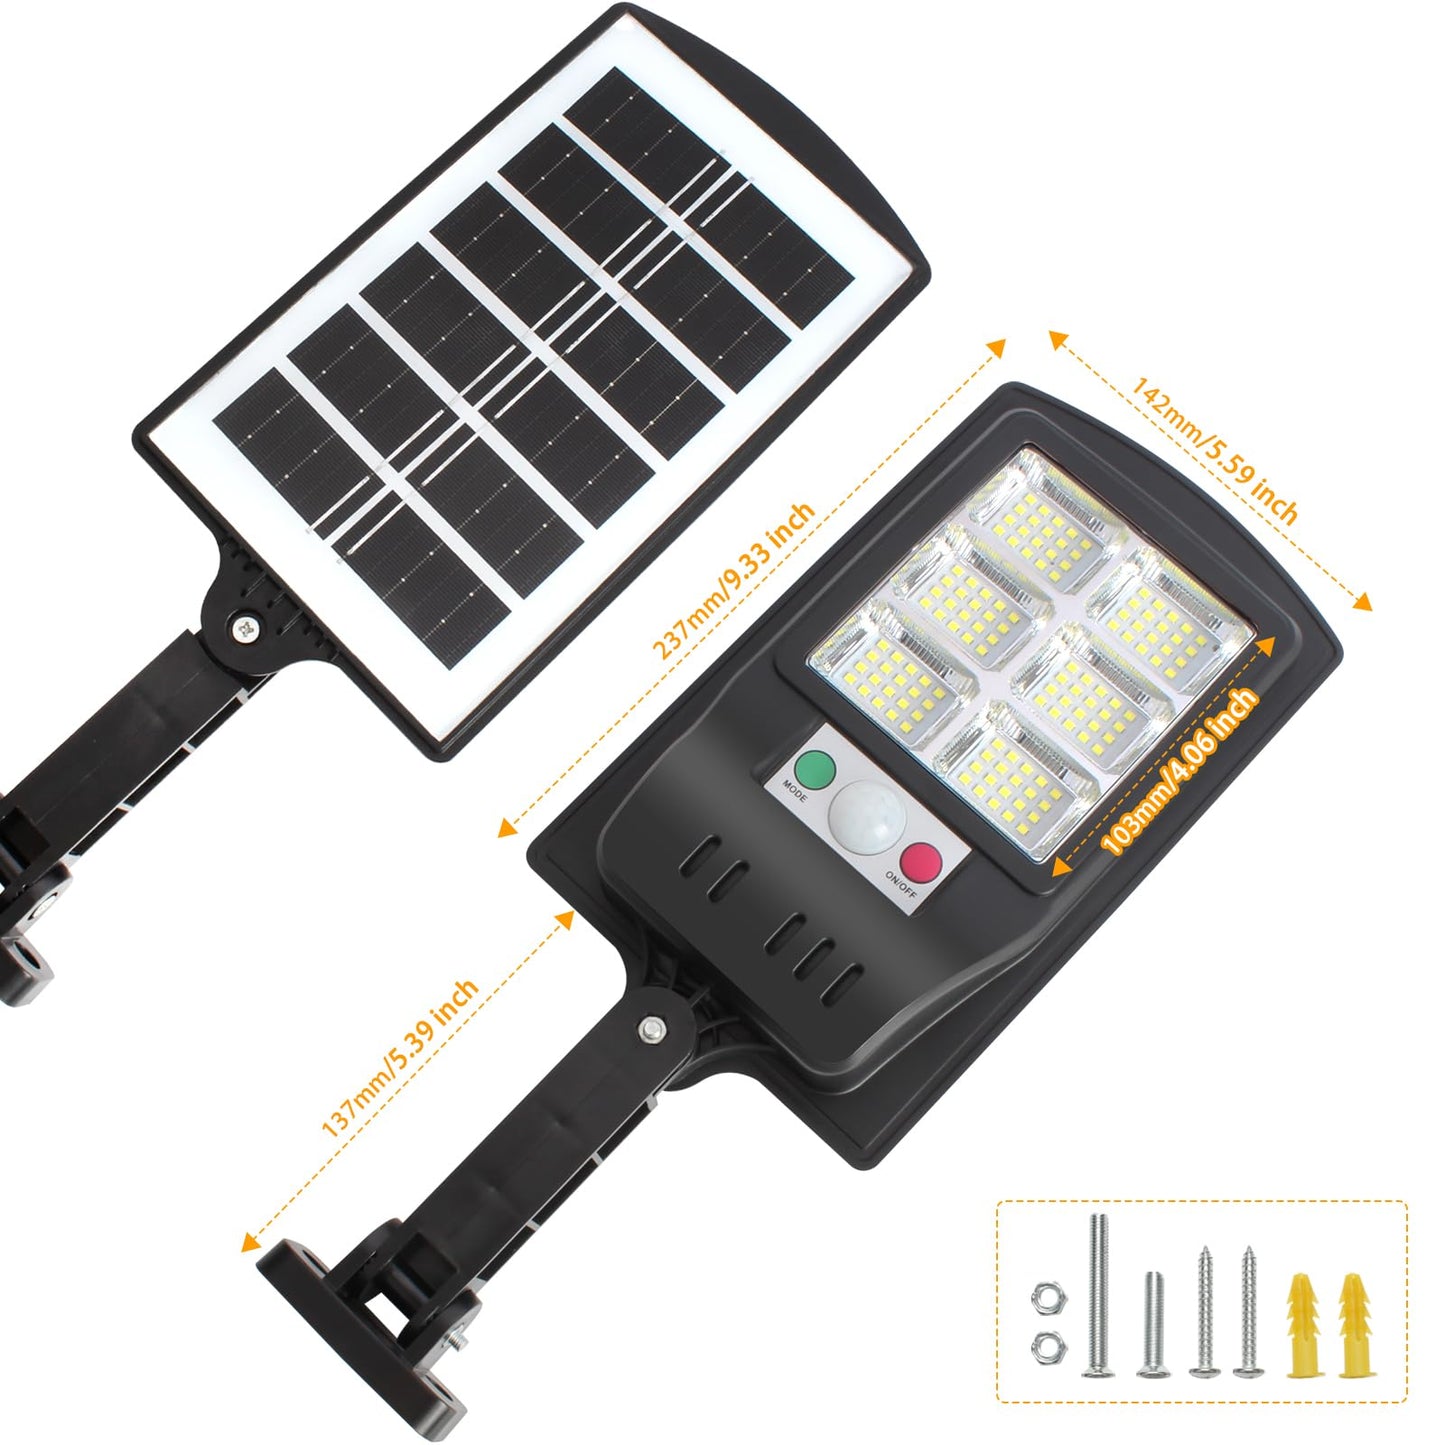 KUFUNG Solar Lights Outdoor Waterproof Cordless Solar Flood Light for Security Motion Sensor Light Luces Solares Perfect for Patio Front Door Deck Fence Gutter Yard Shed Path(6PACK,120LED)